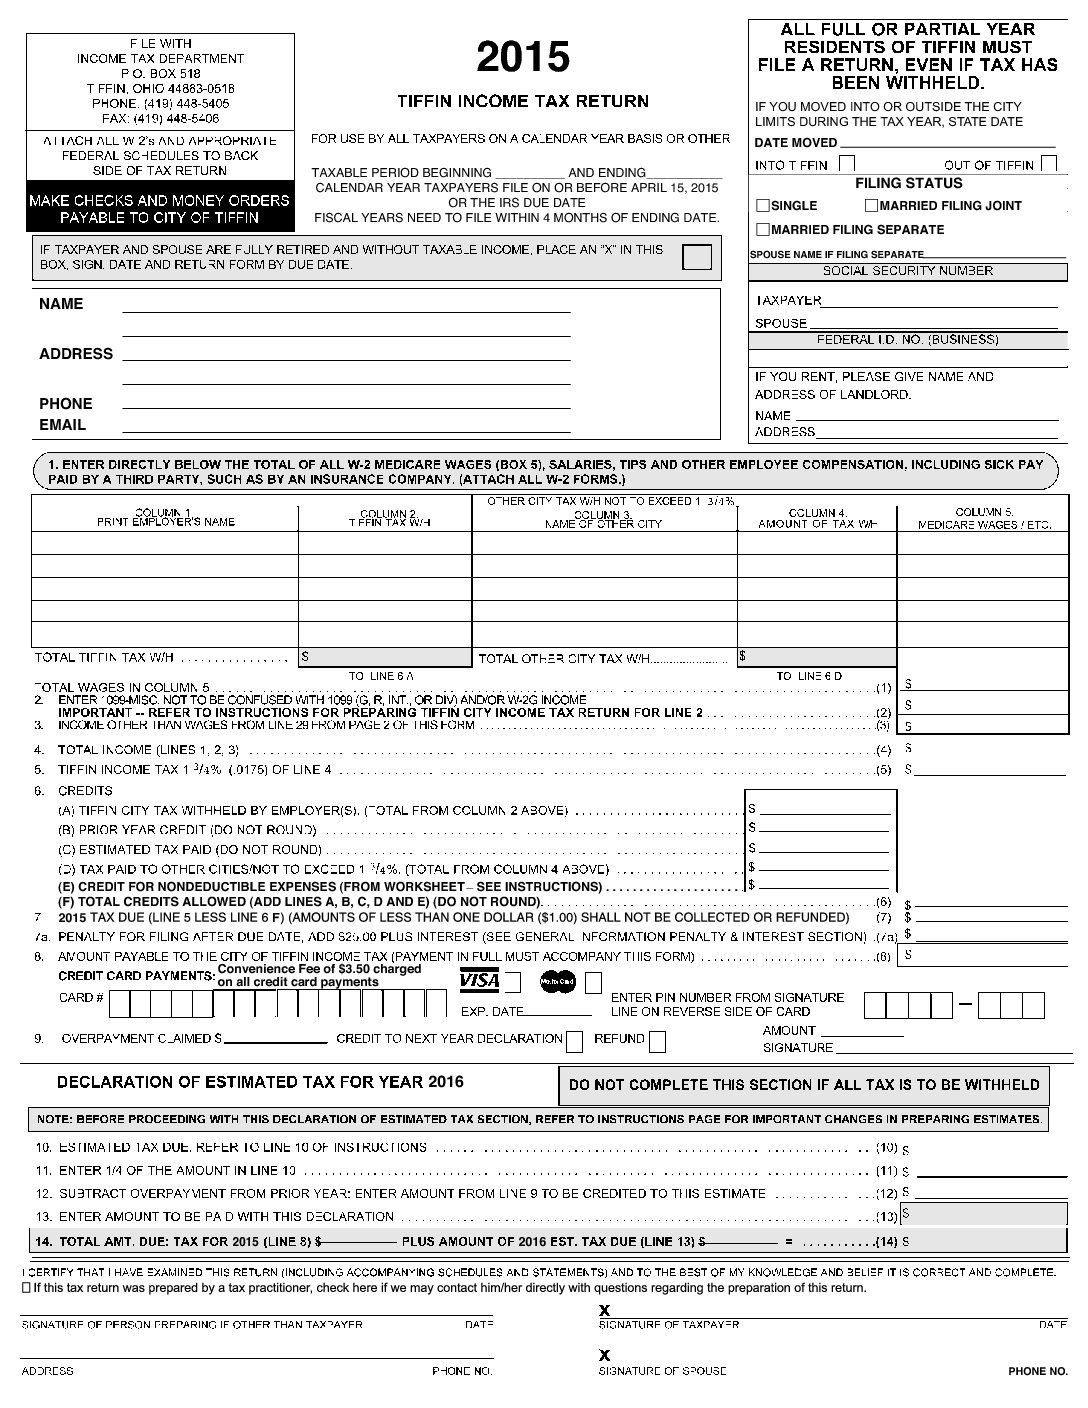 Tax Forms | City of Tiffin